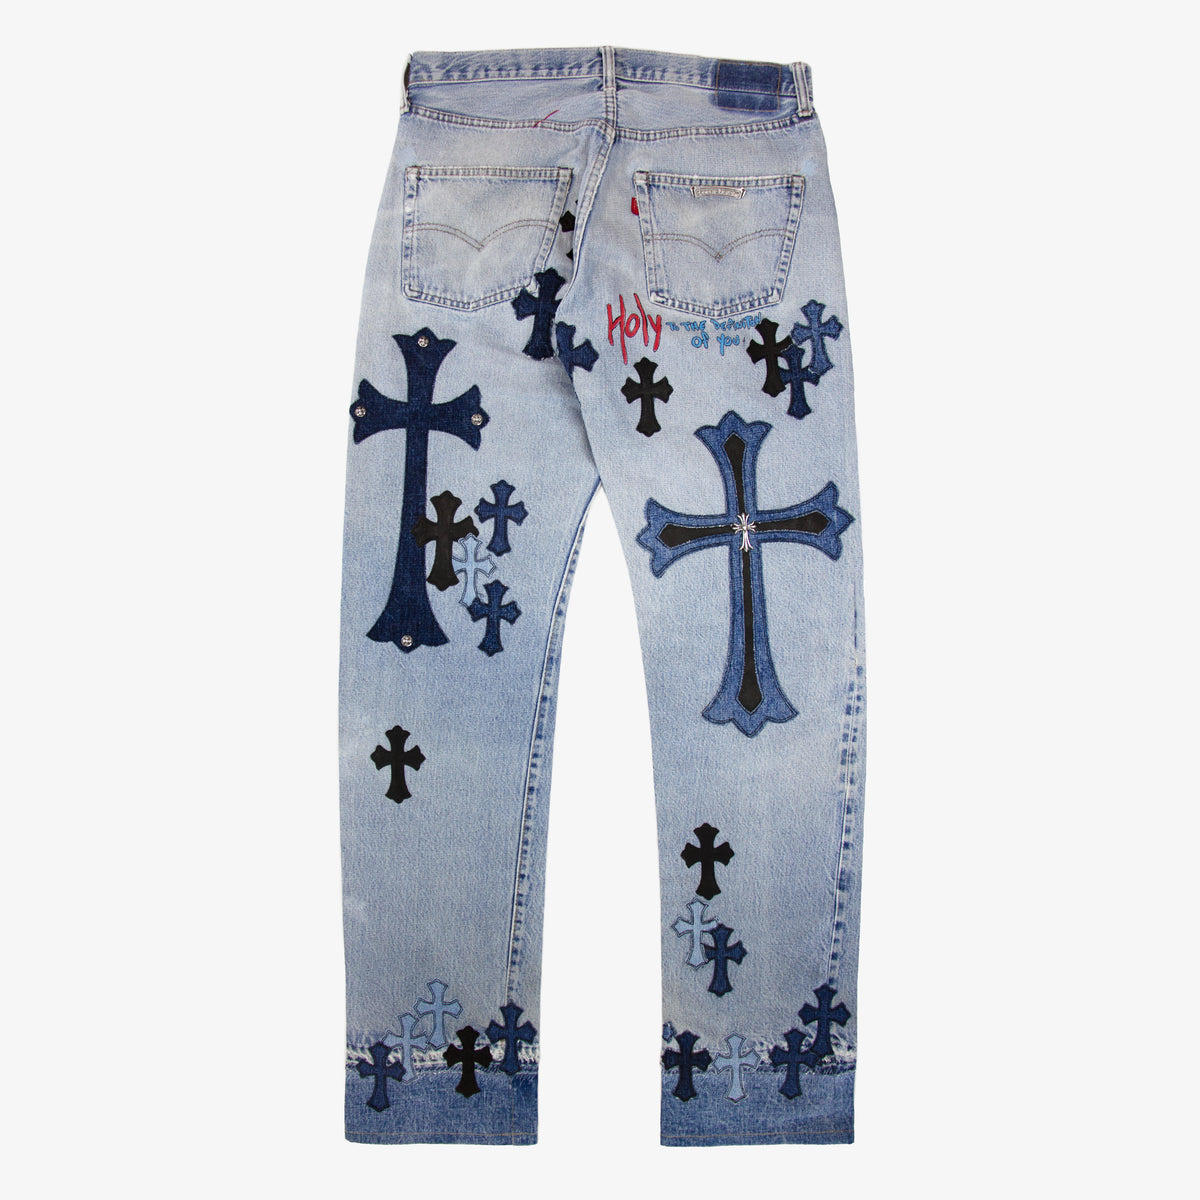 chrome hearts patches on jeans｜TikTok Search